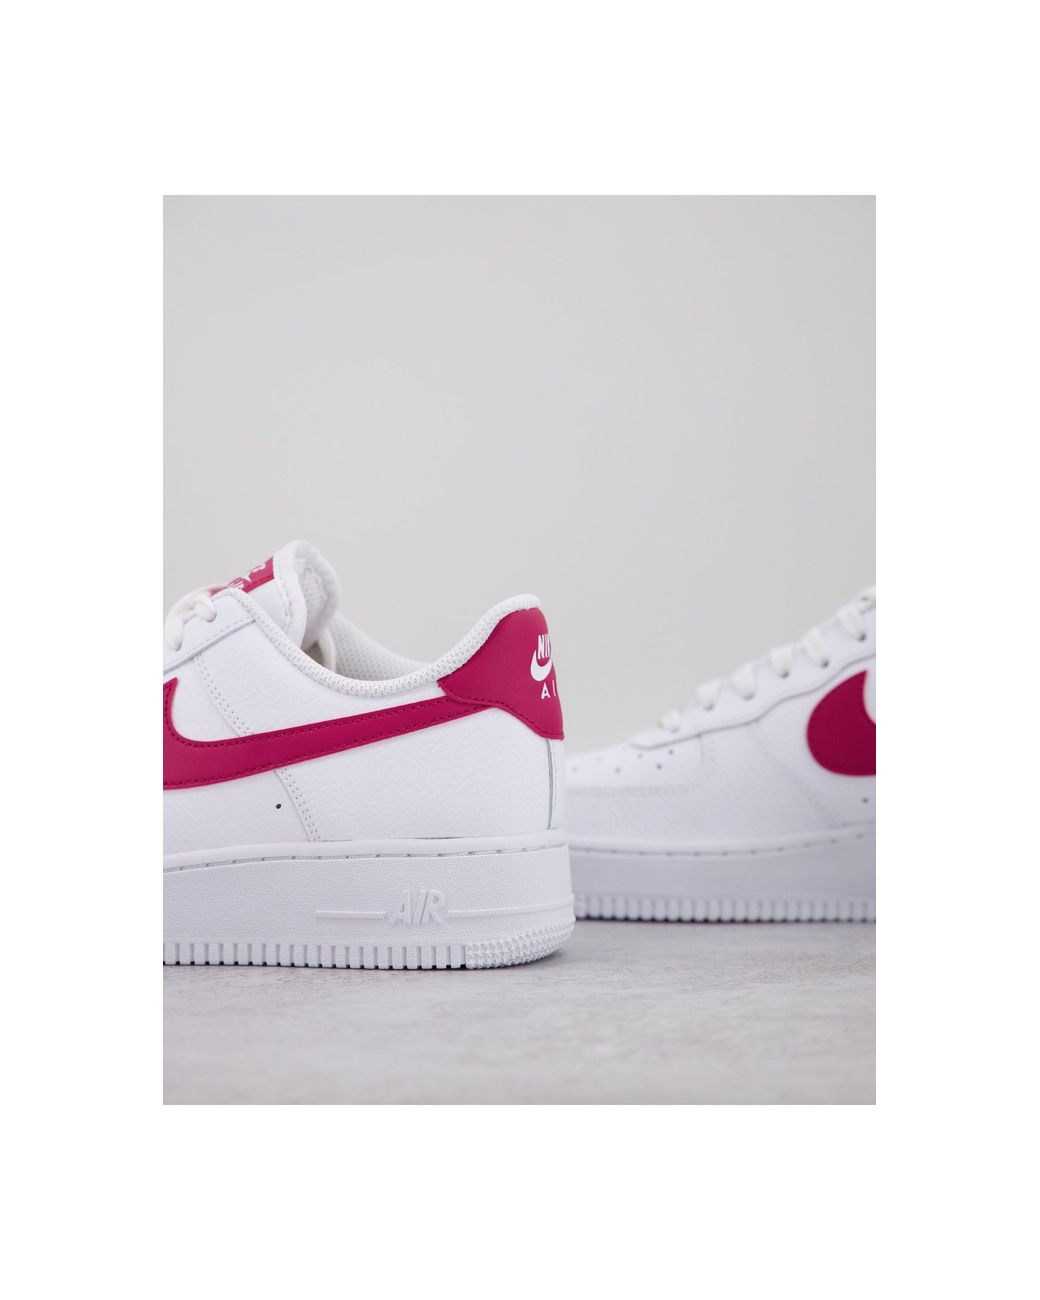 Nike – air force 1 '07 – sneaker und edlem rot in Weiß | Lyst AT